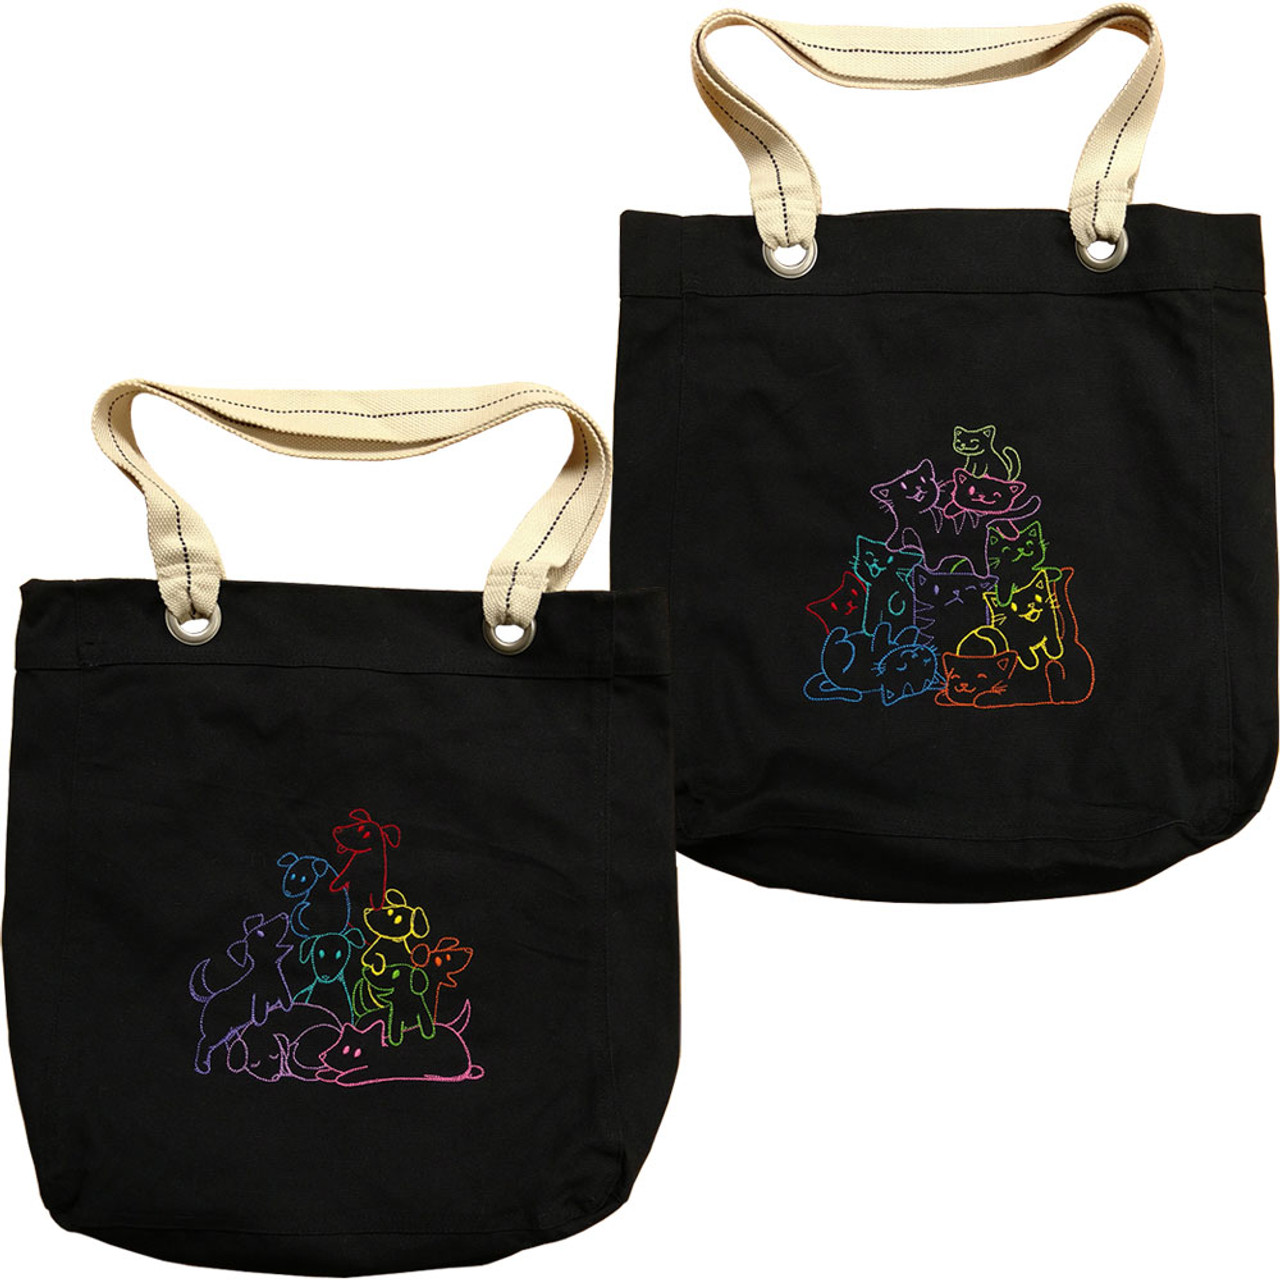 BirdDawg Embroidered Canvas Tote Bag With Colorful Pile of Pets Design